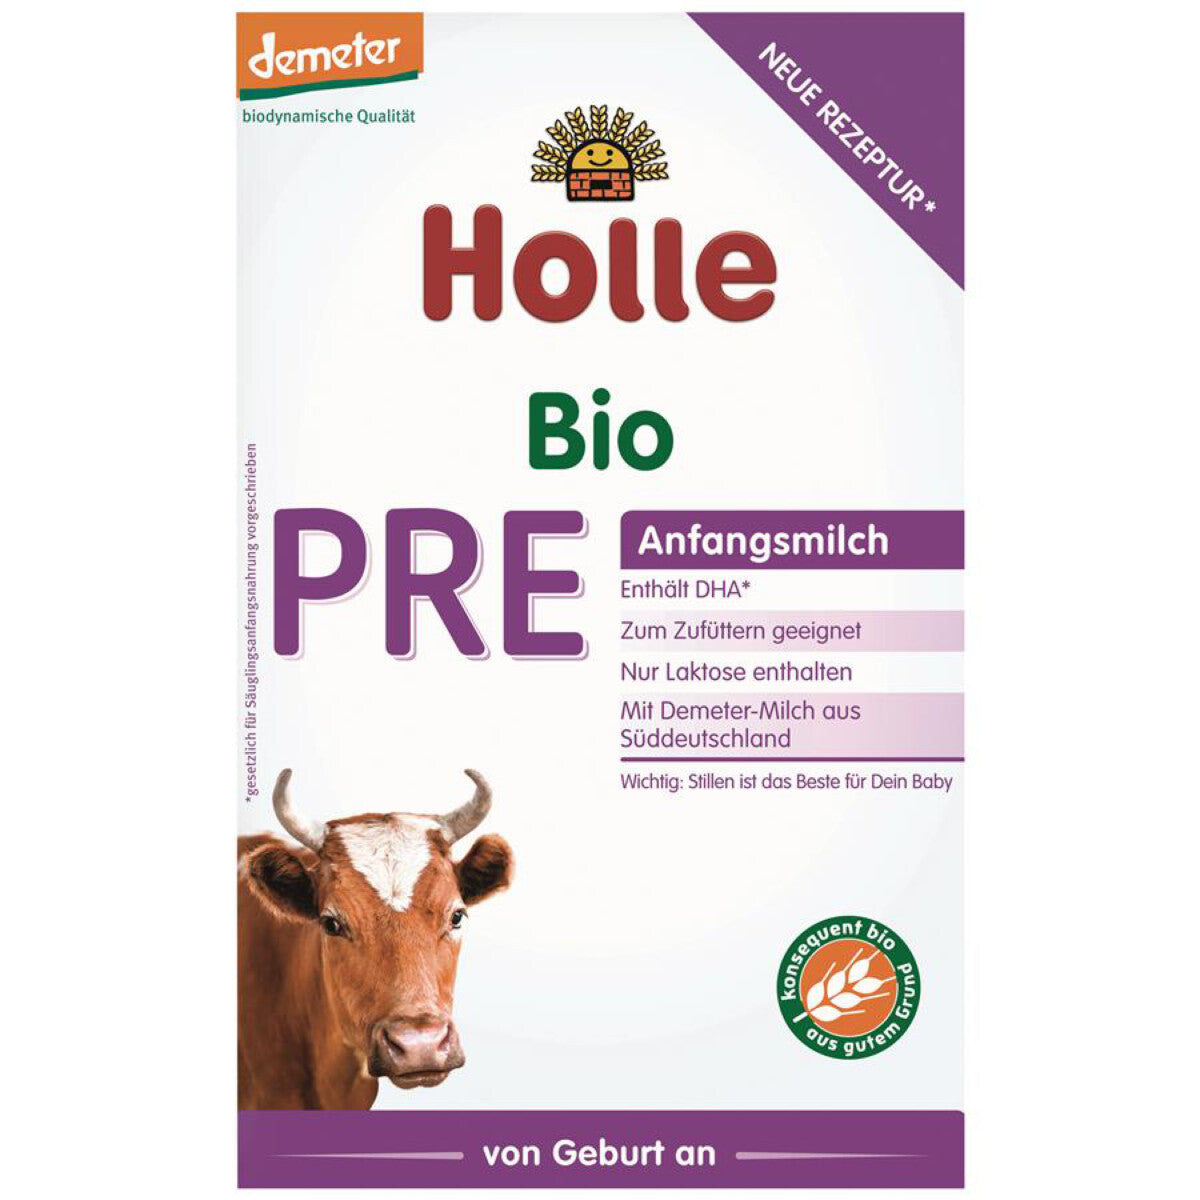 HOLLE Pre-Anfangsmilch - 400 g